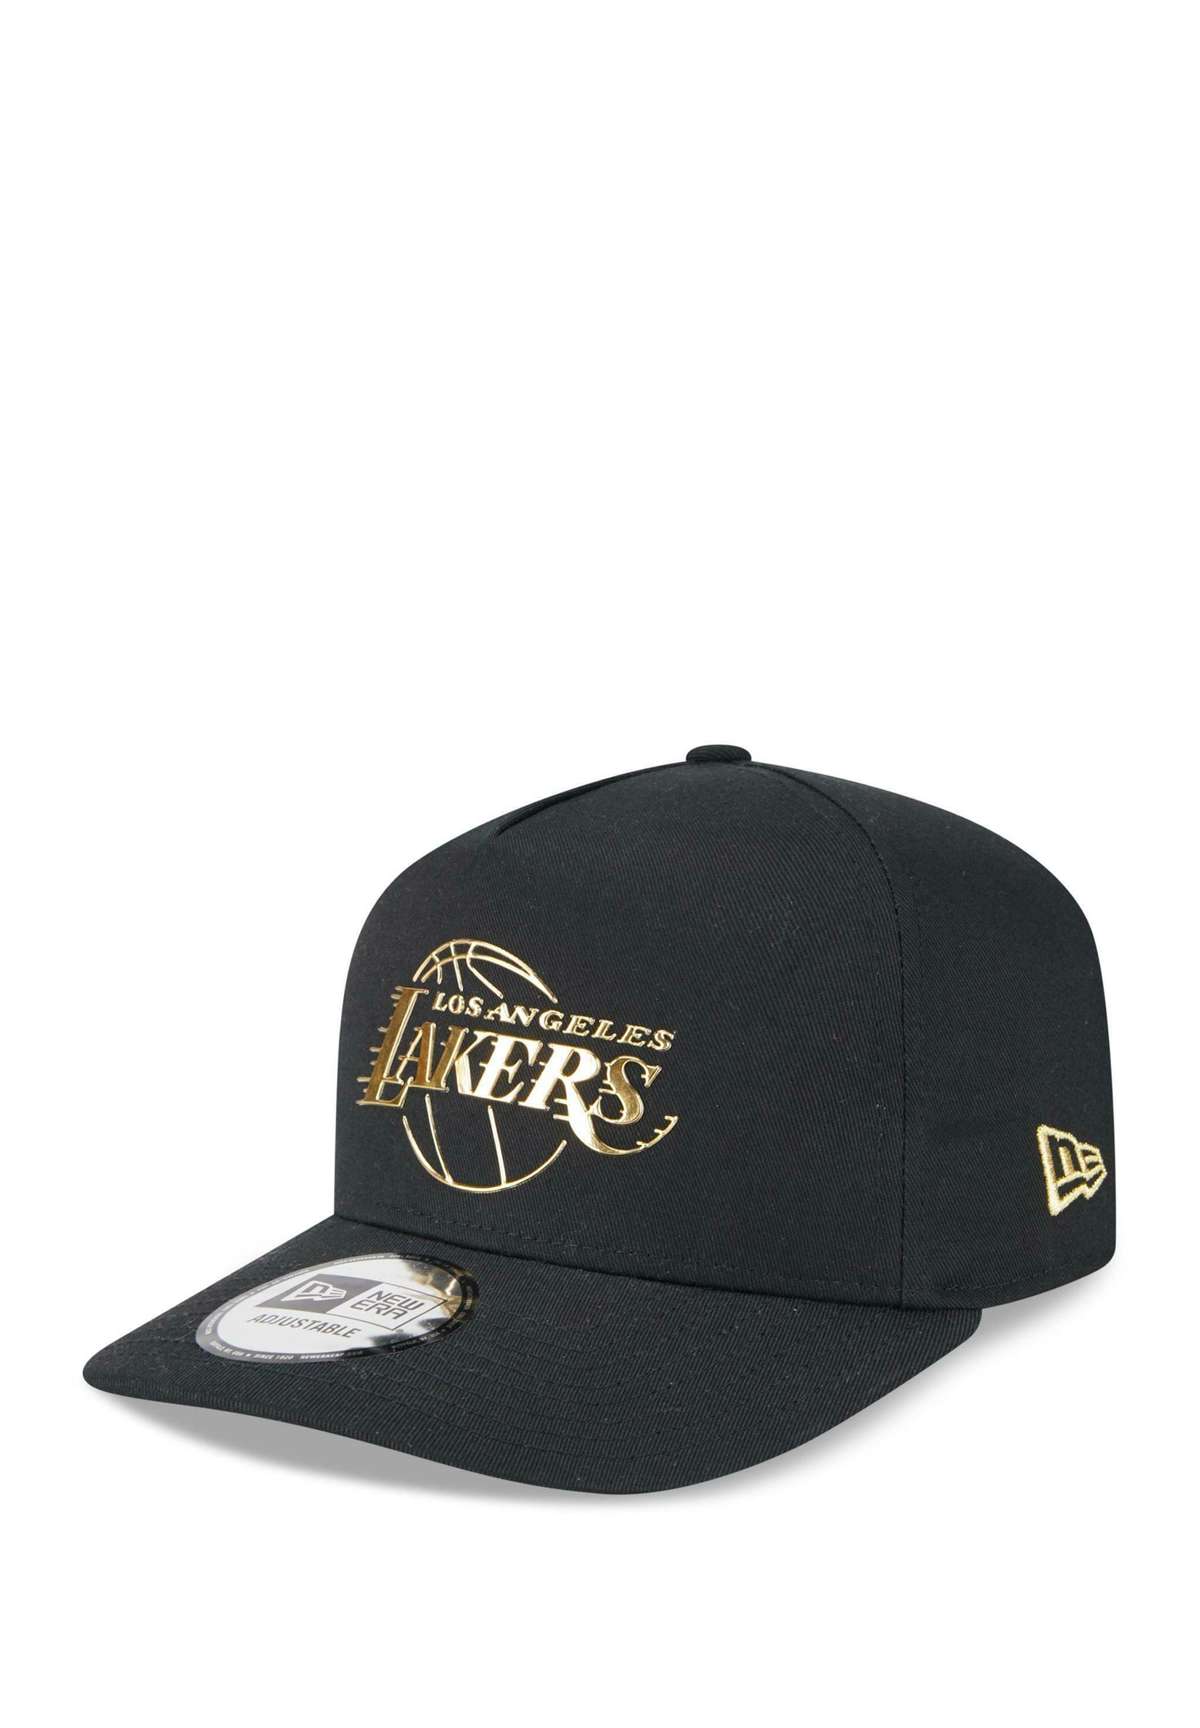 Кепка LOS ANGELES LAKERS NBA FOIL PACK 9FORTY E-FRAME SNAPBACK